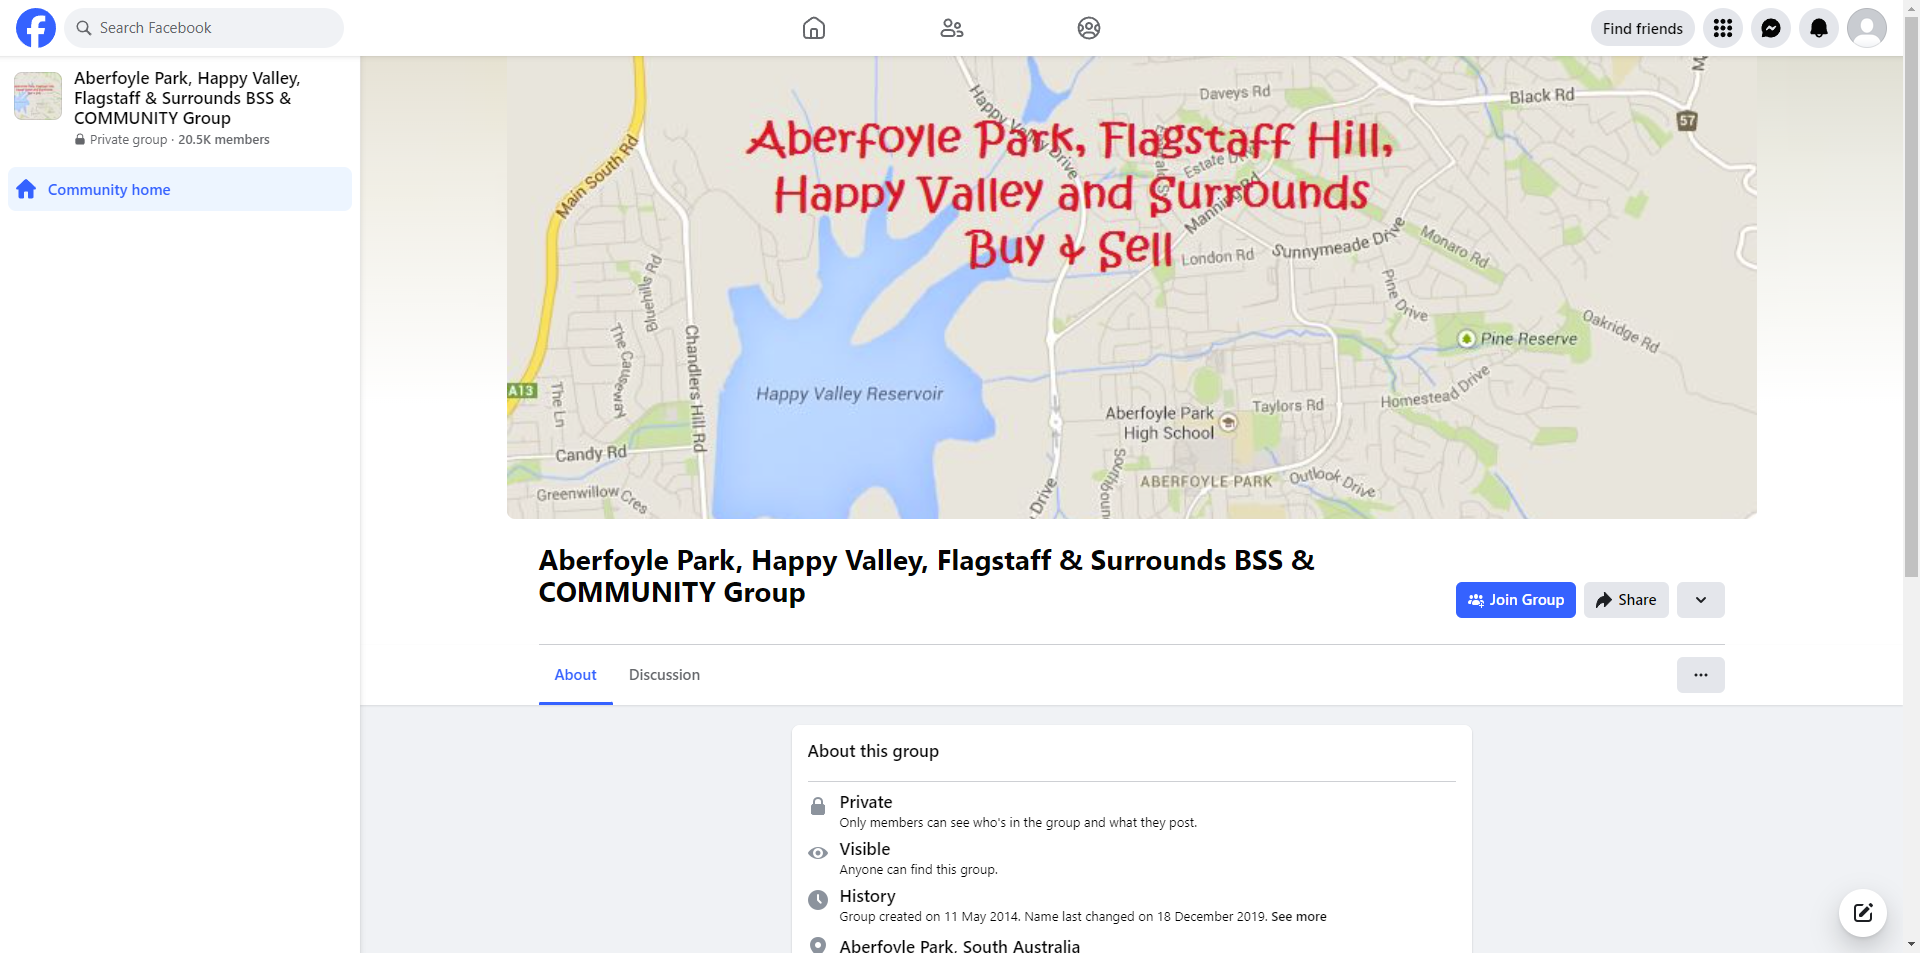 Aberfoyle Park, Flagstaff Hill, Happy Valley and Surrounds Buy & Sell